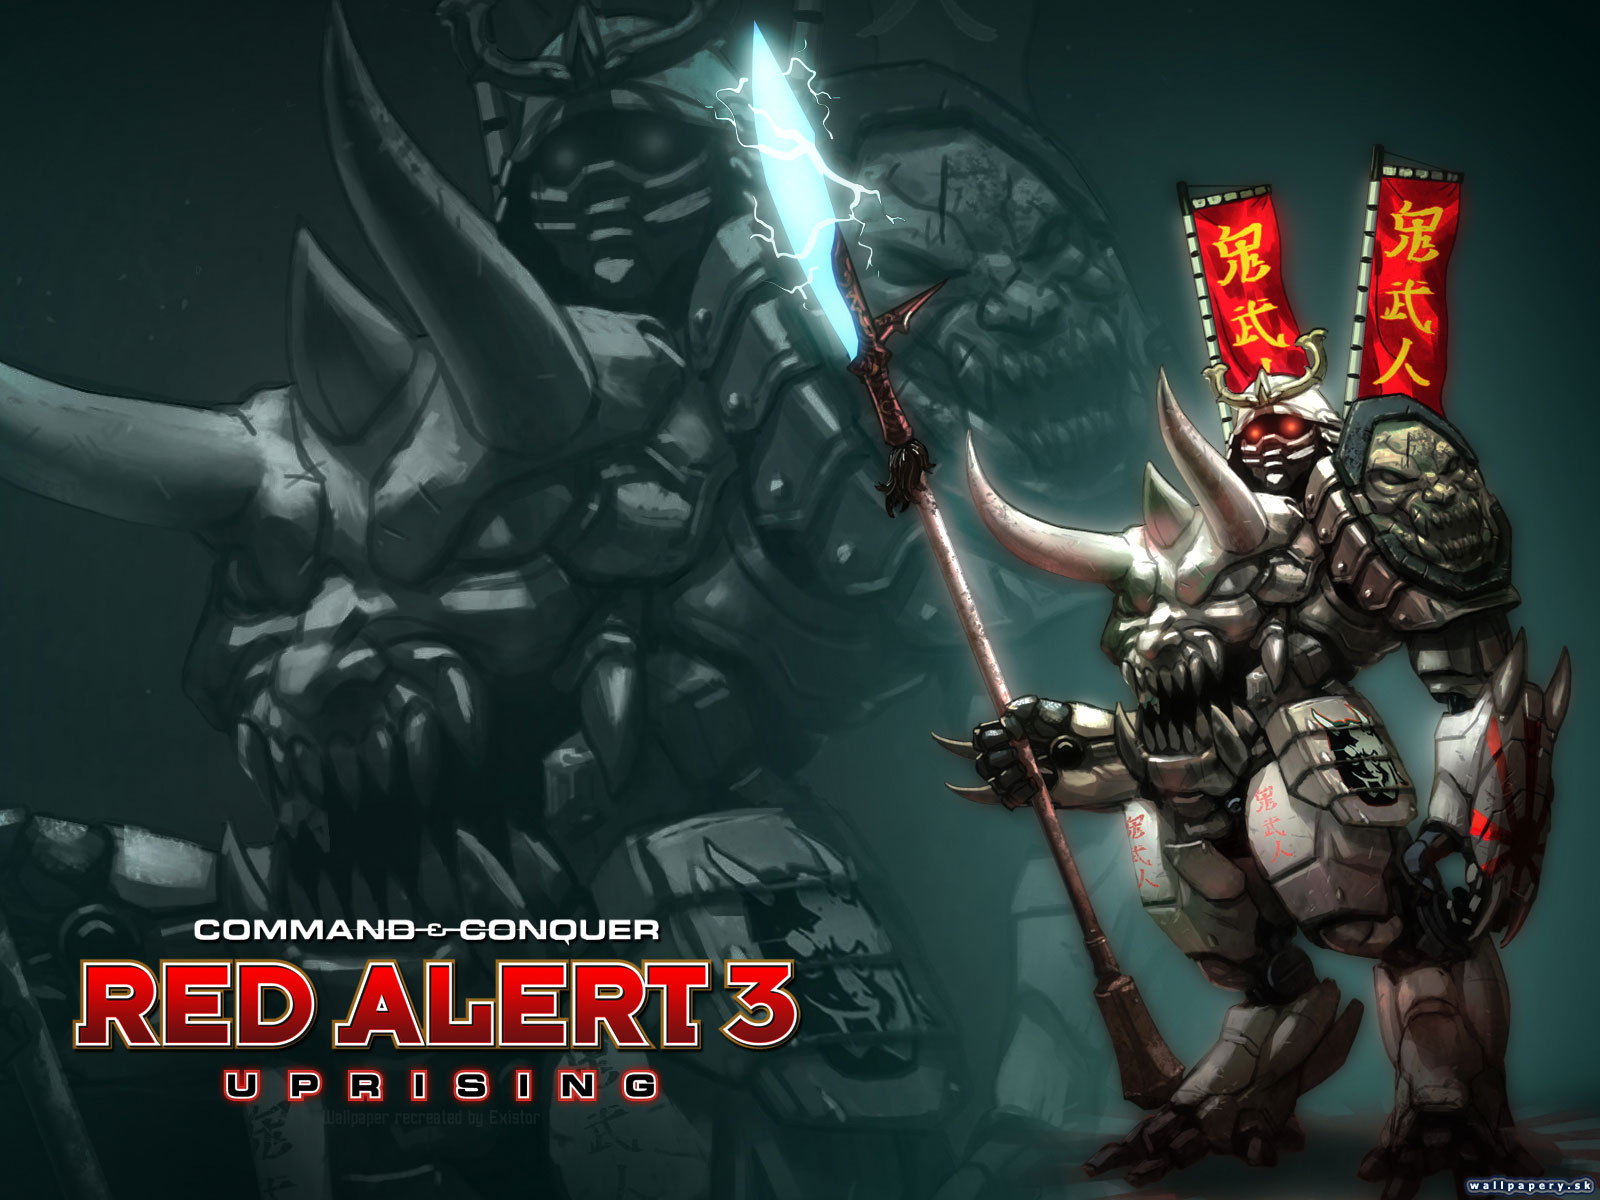 Command & Conquer: Red Alert 3: Uprising - wallpaper 5